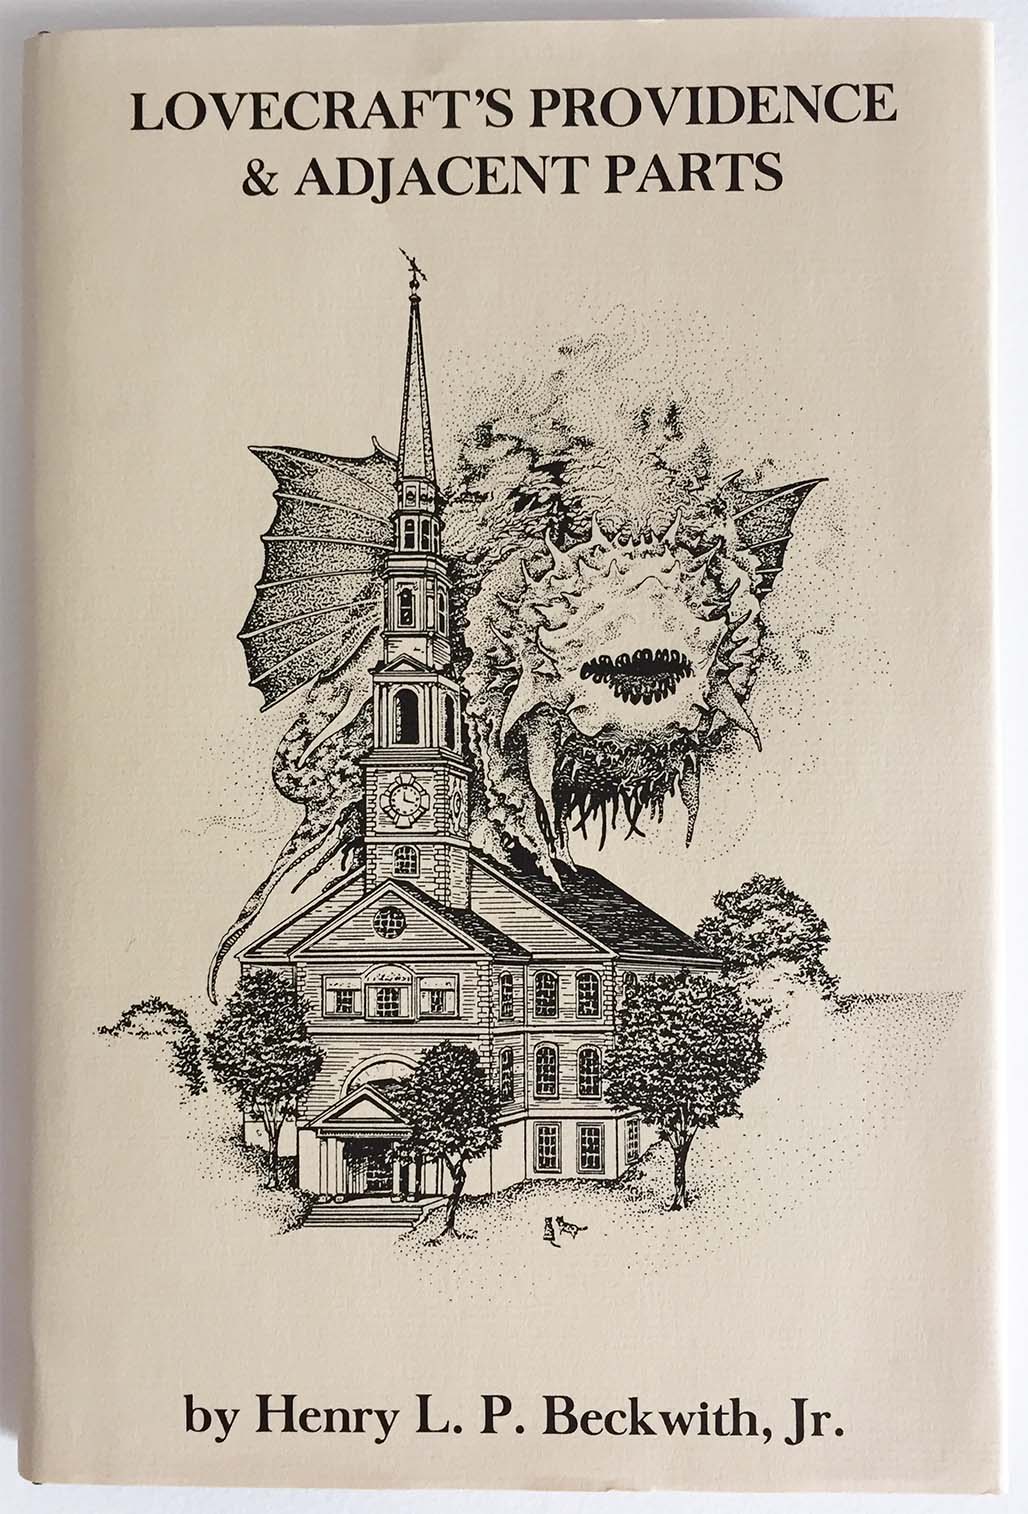 Henry Beckwith: Lovecraft's Providence 1986